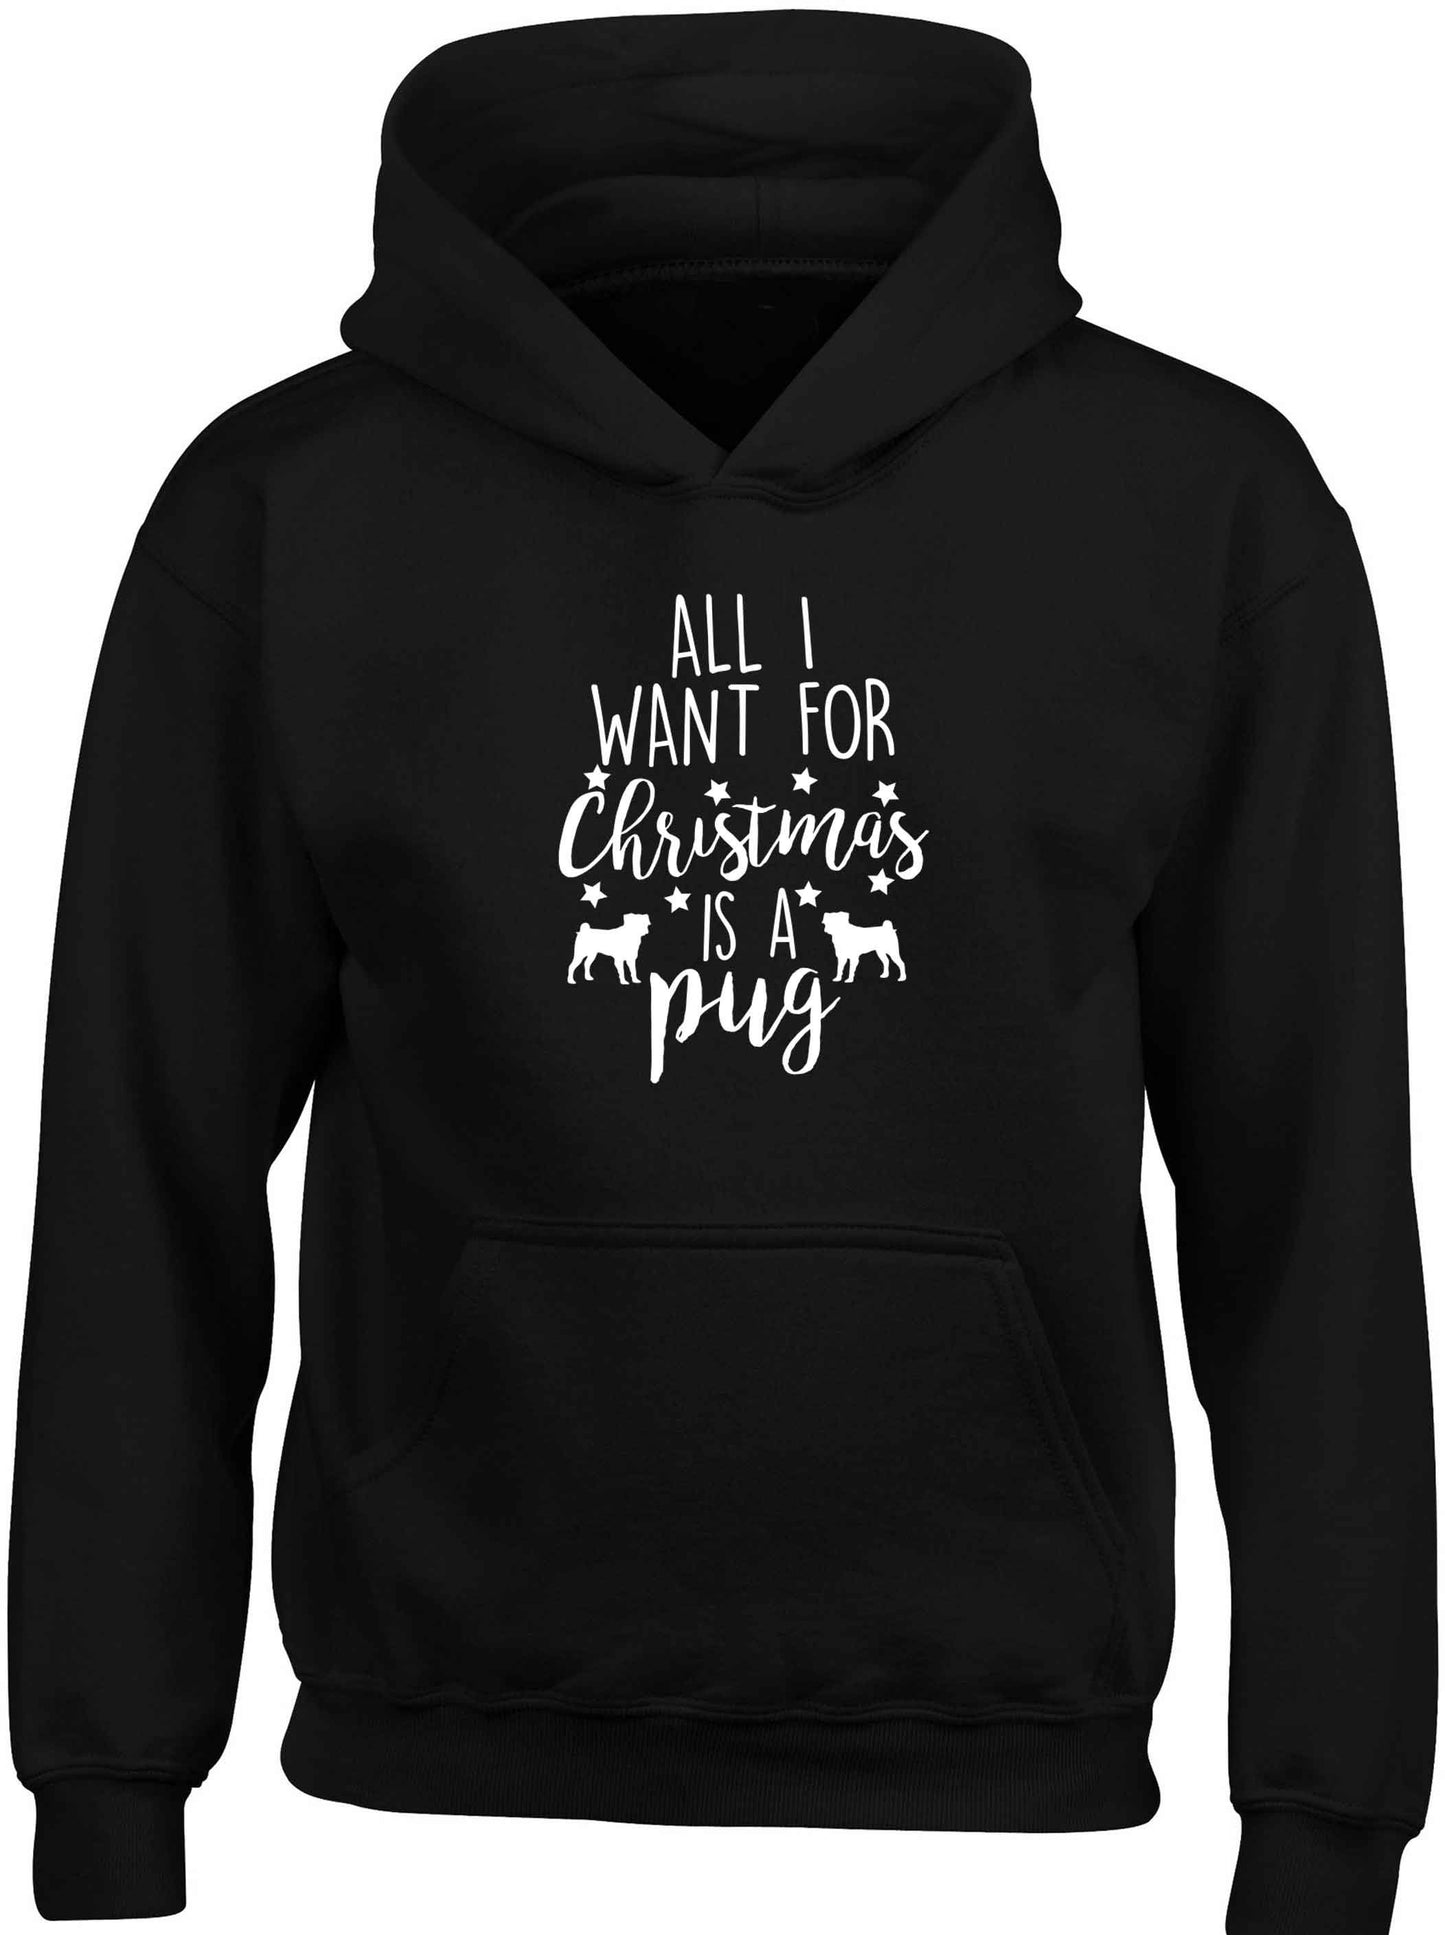 All I want for Christmas is a pug children's black hoodie 12-13 Years